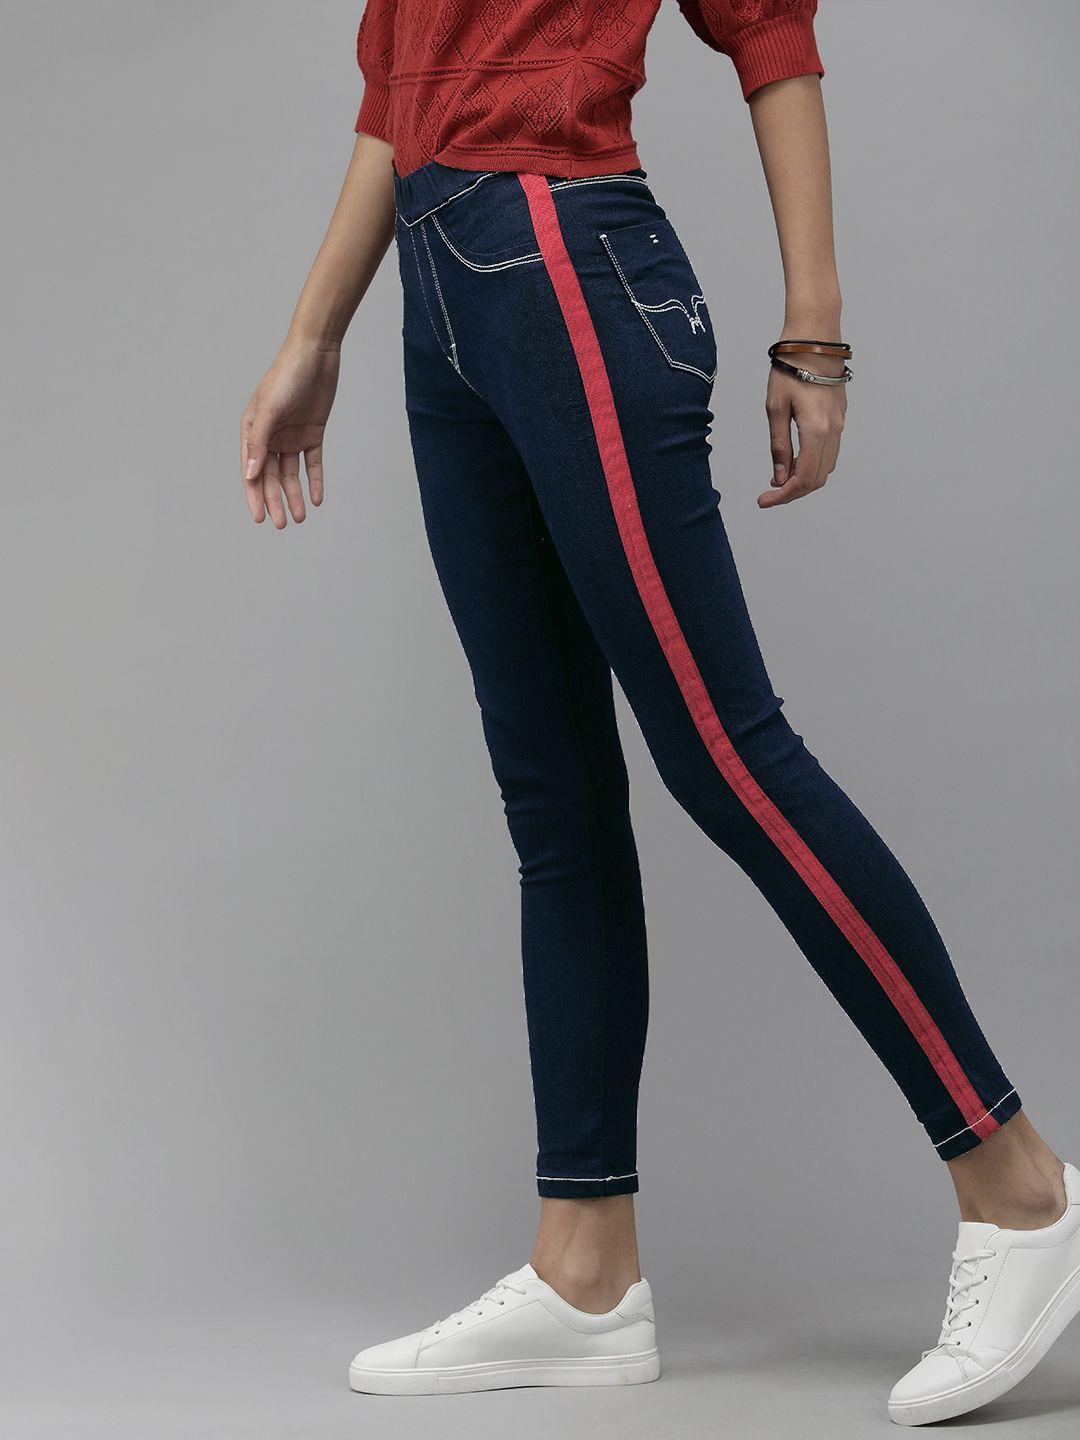 roadster women navy blue & red side taped ankle length skinny fit jeggings